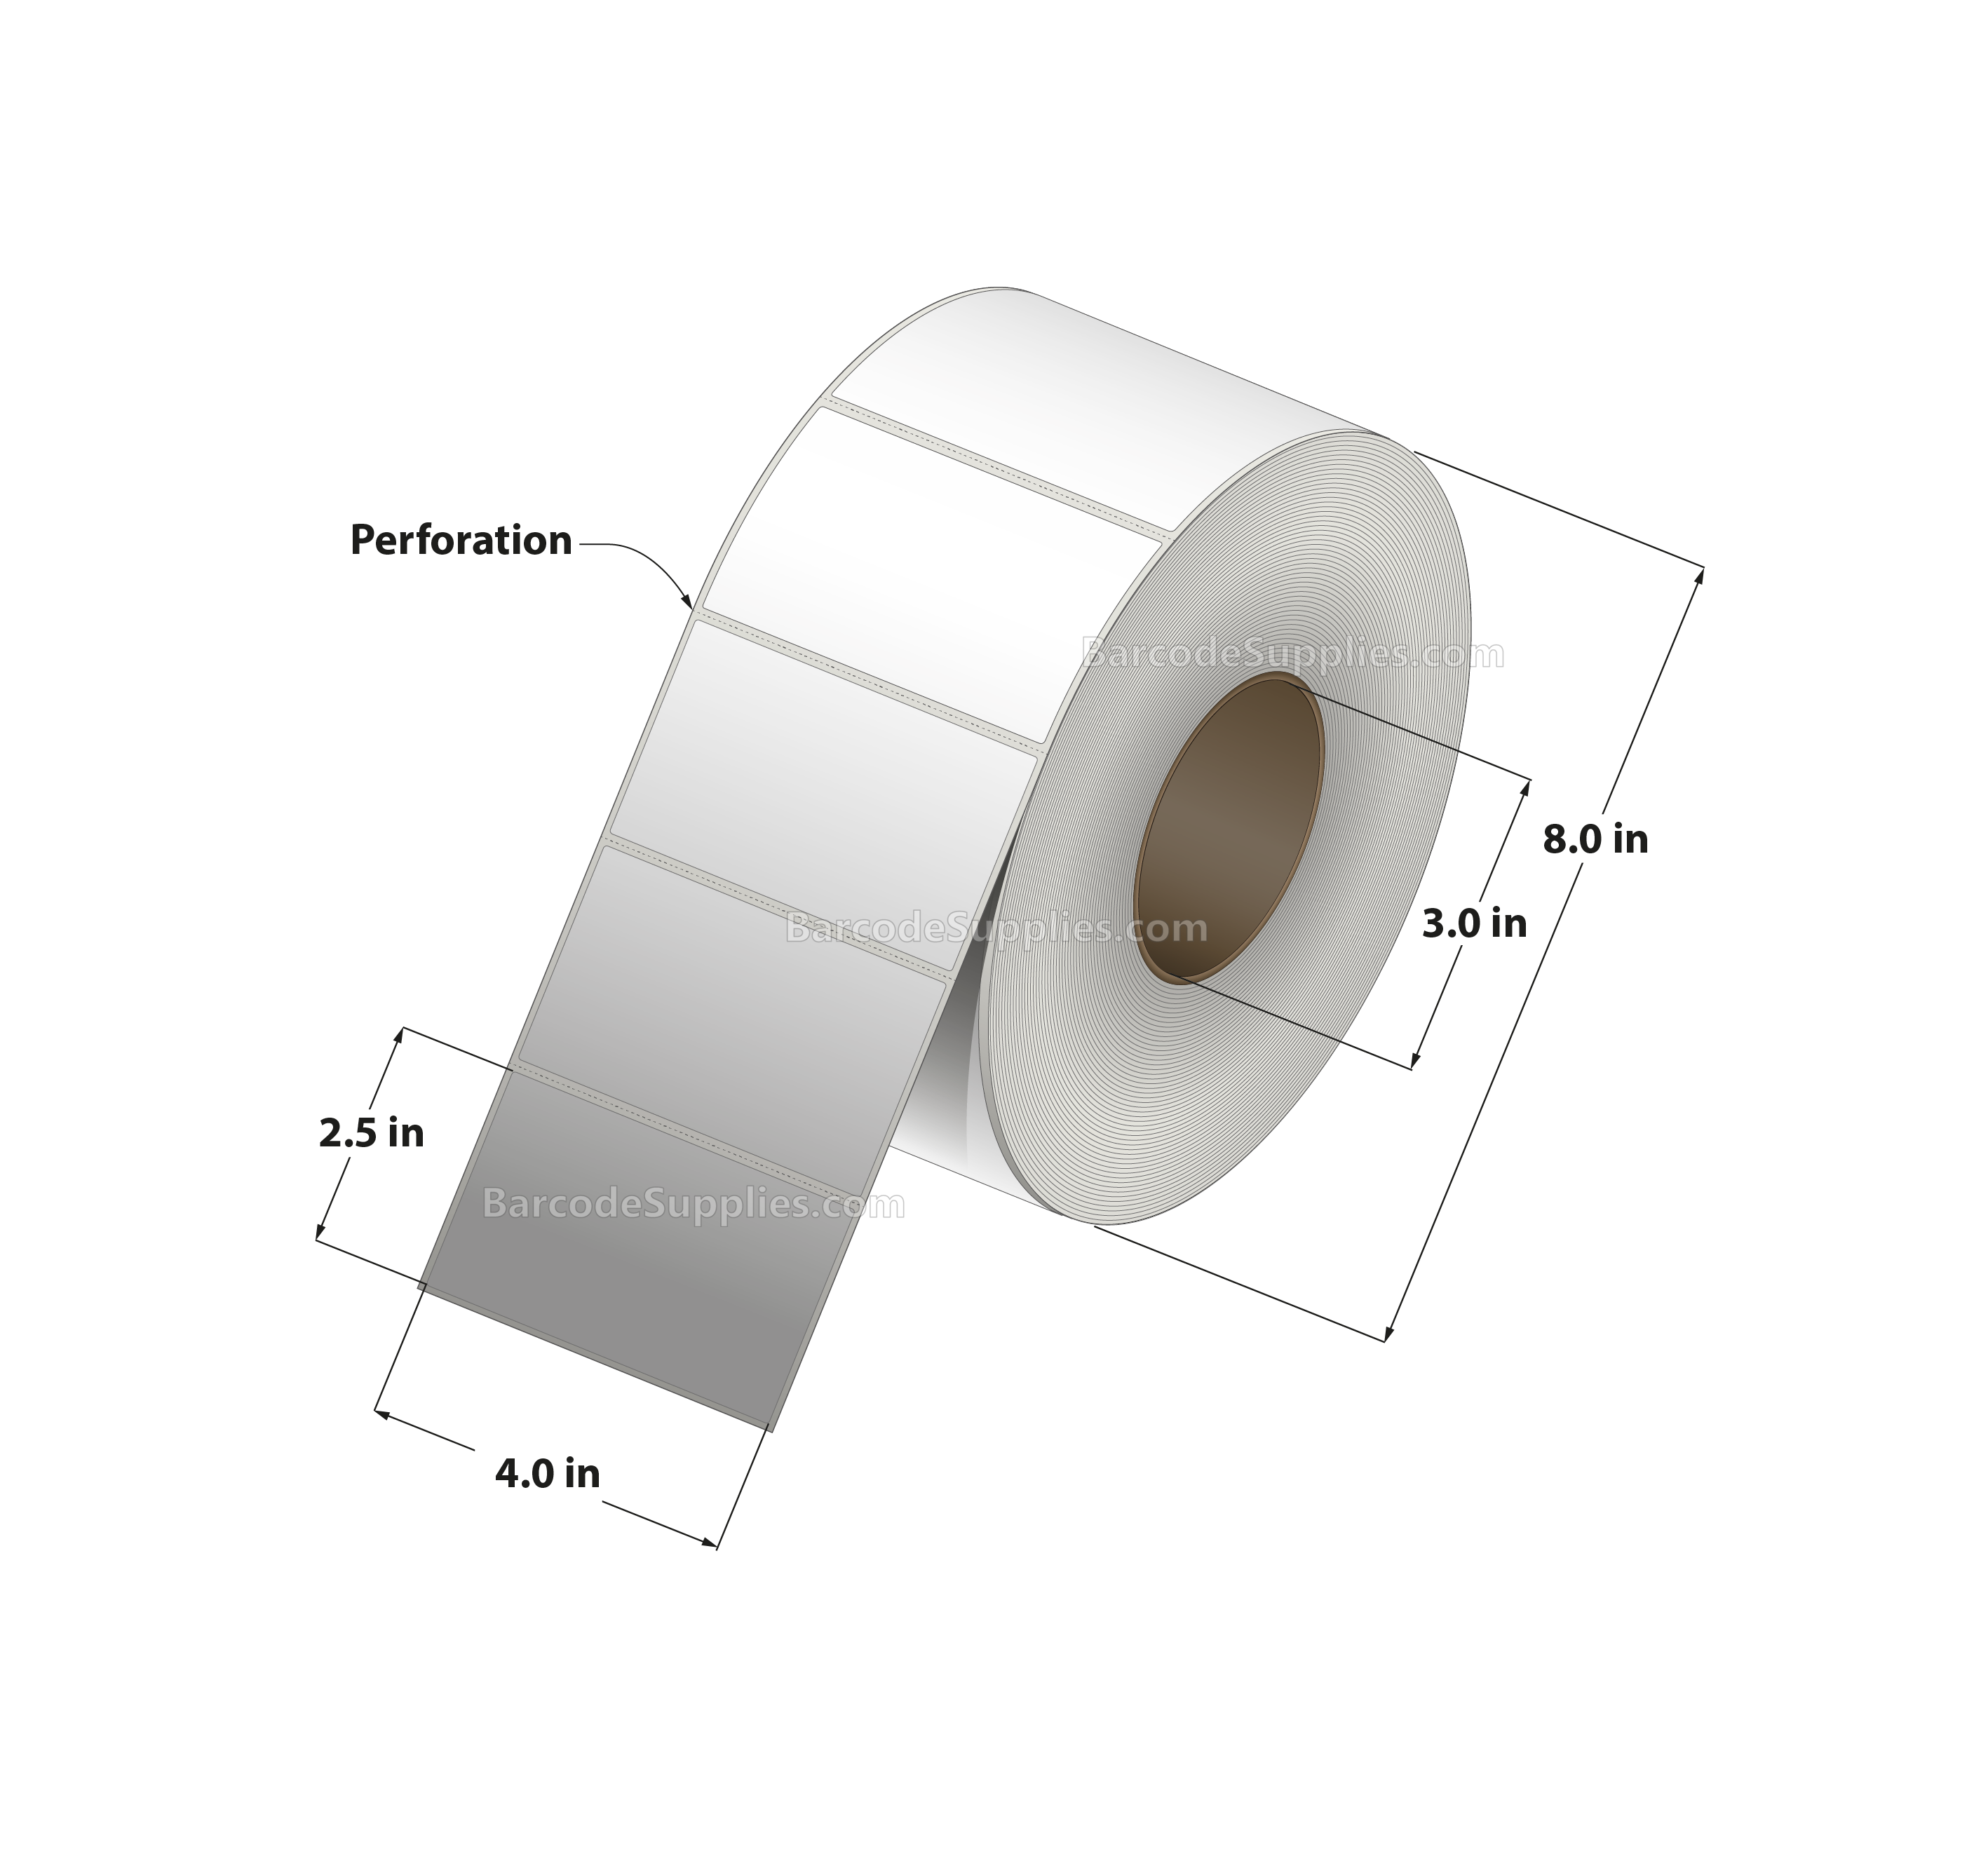 4 x 2.5 Thermal Transfer White Labels With Rubber Adhesive - Perforated - 2400 Labels Per Roll - Carton Of 4 Rolls - 9600 Labels Total - MPN: CTT400250-3P